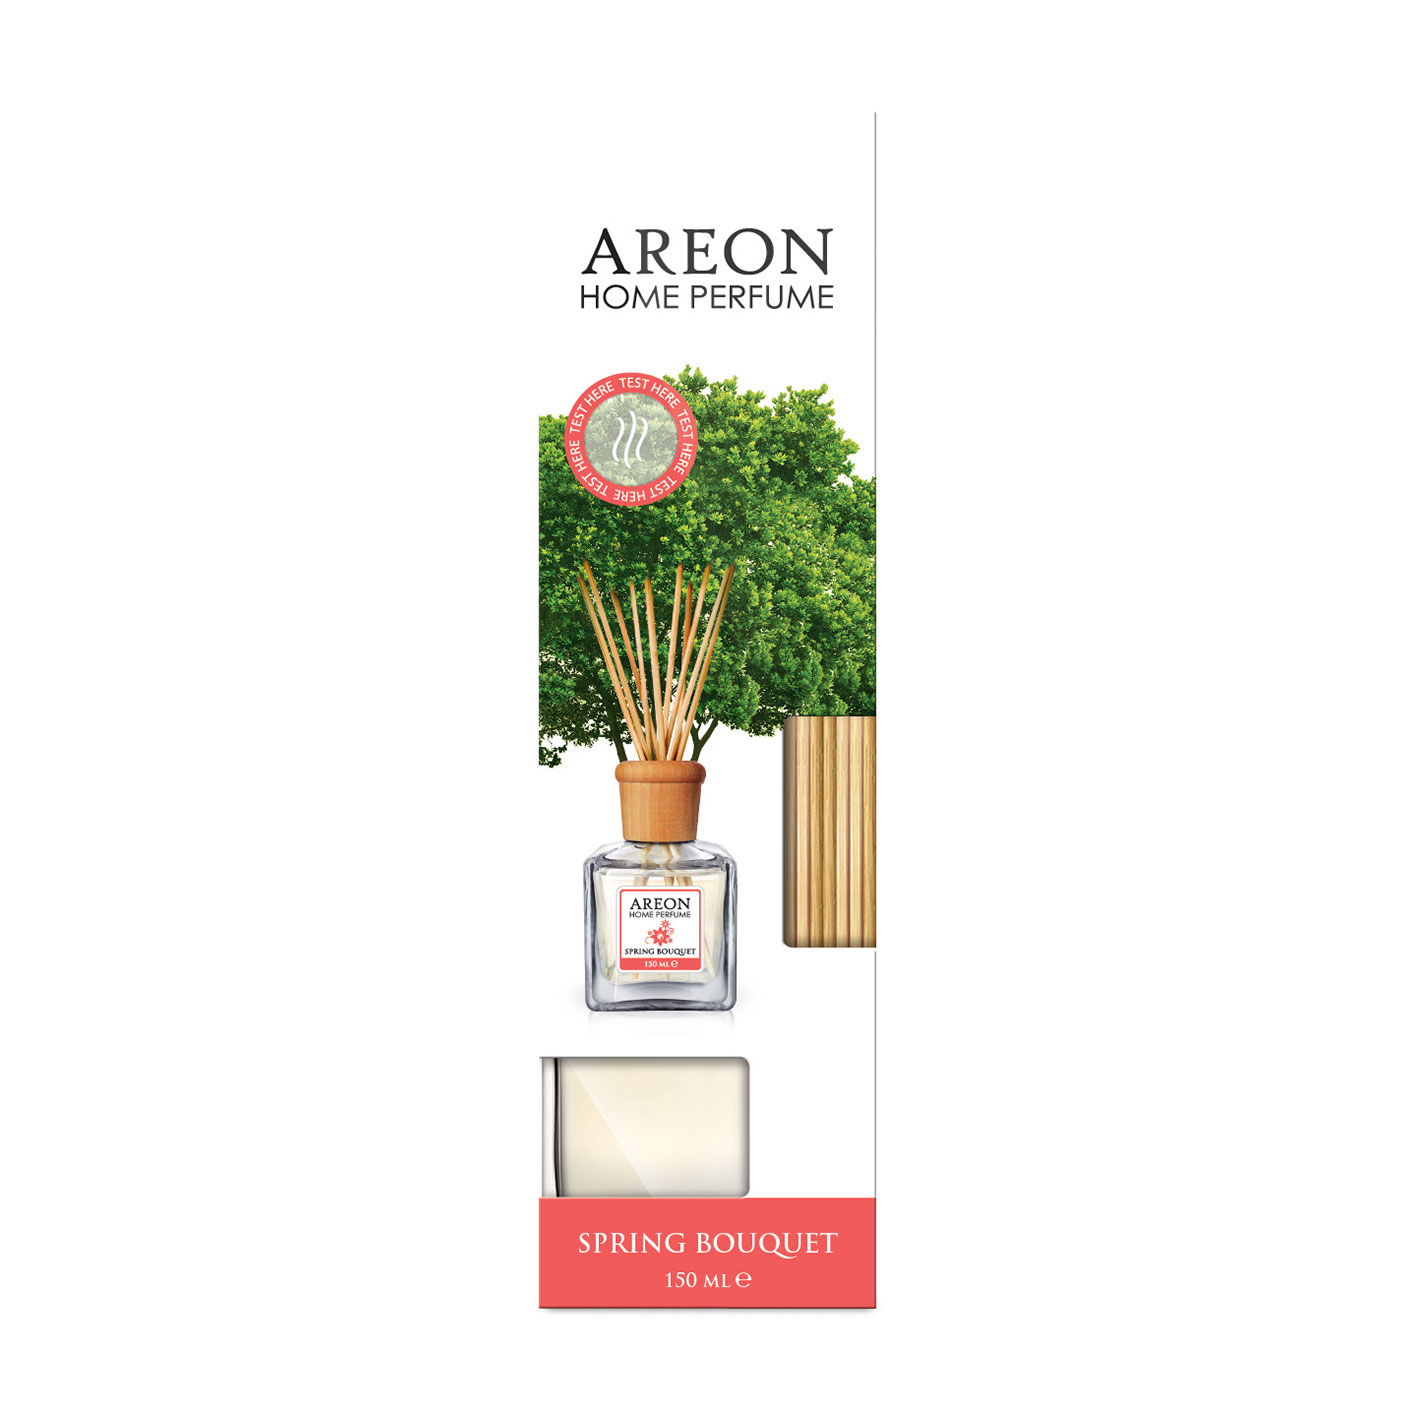 Areon Home Perfume 150ml Spring Bouquet